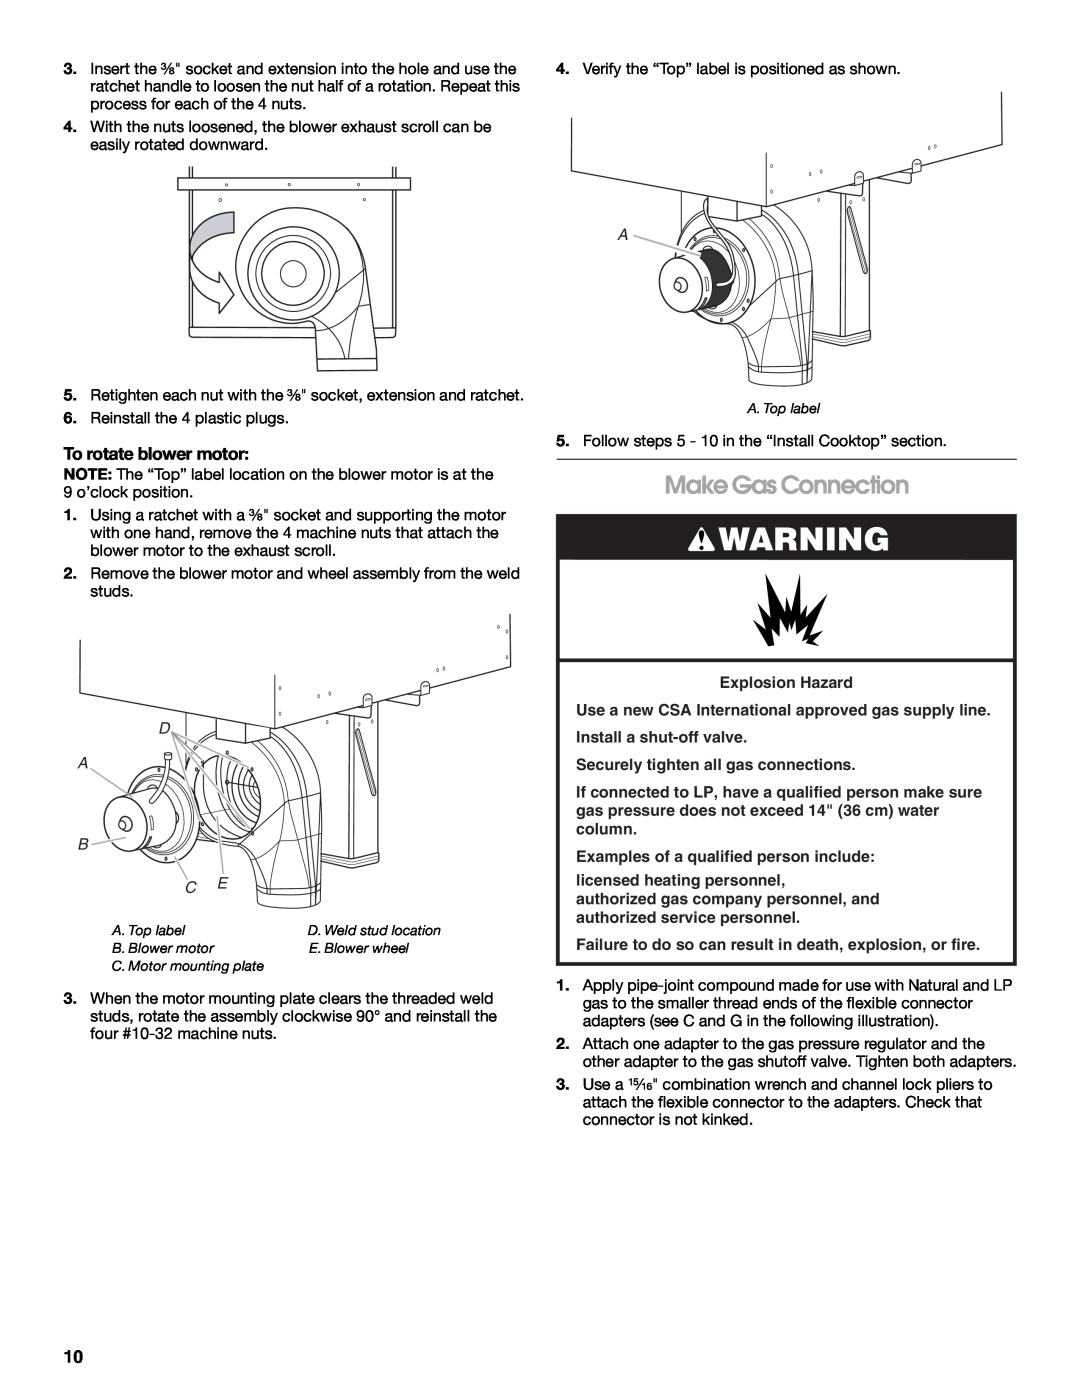 Jenn-Air W10526080A installation instructions Make Gas Connection, To rotate blower motor, D A B 